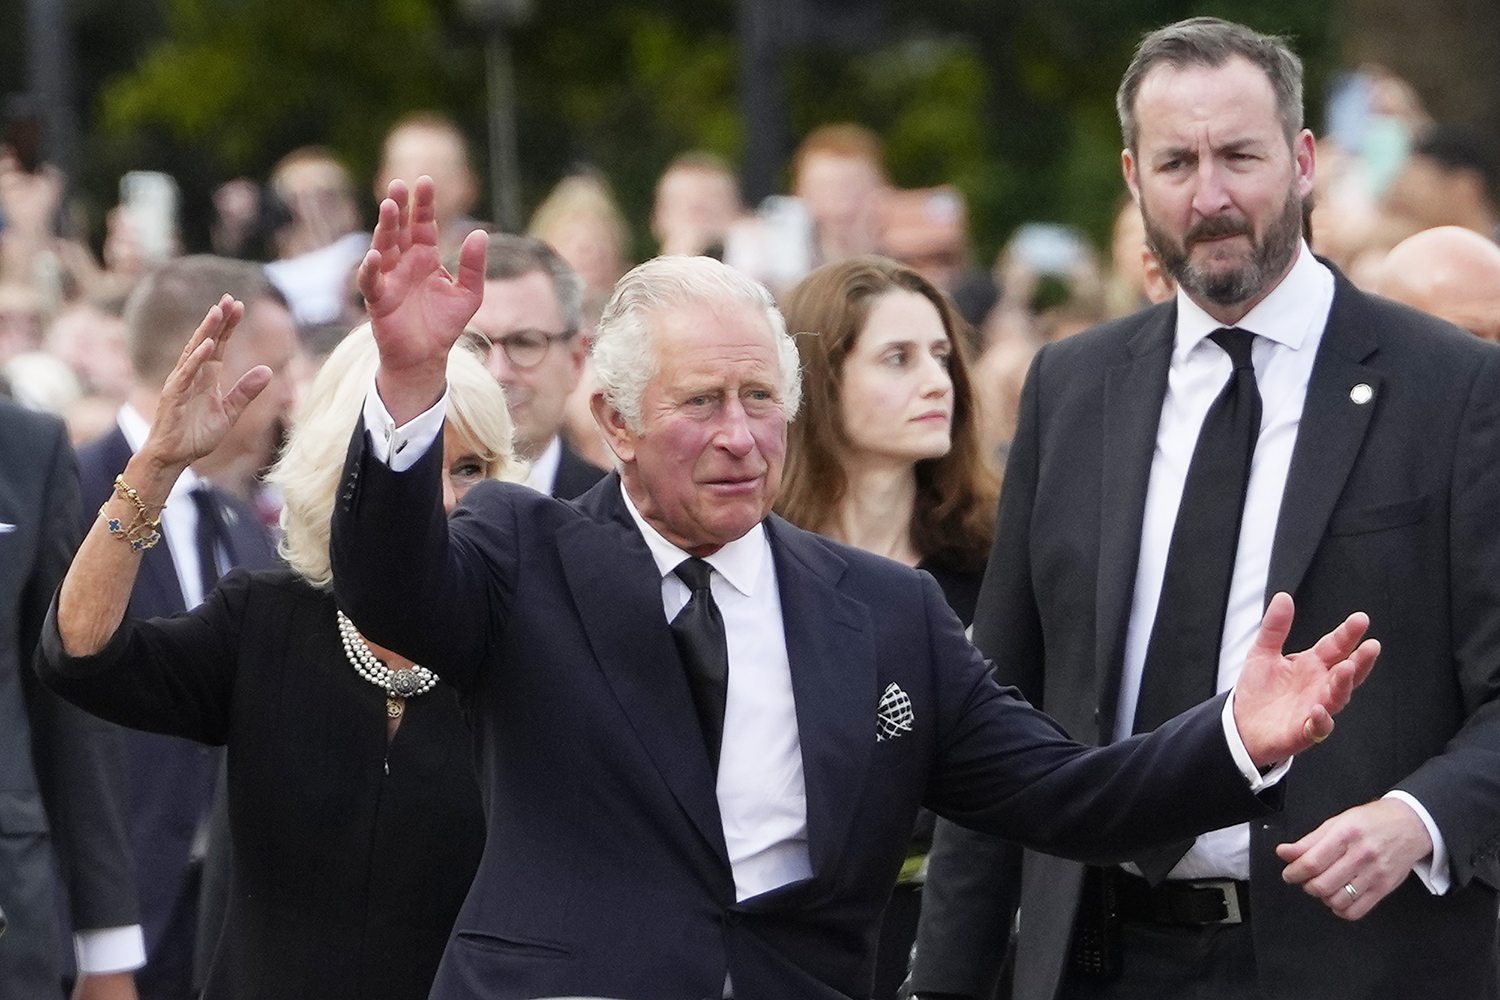 King Charles III and Camilla, the Queen Consort, wave as they arrive at Buckingham Palace in London, Friday, Sept. 9, 2022. Queen Elizabeth II, Britain's longest-reigning monarch and a rock of stability across much of a turbulent century, died Thursday Sept. 8, 2022, after 70 years on the throne. She was 96. (AP Photo/Kirsty Wigglesworth)